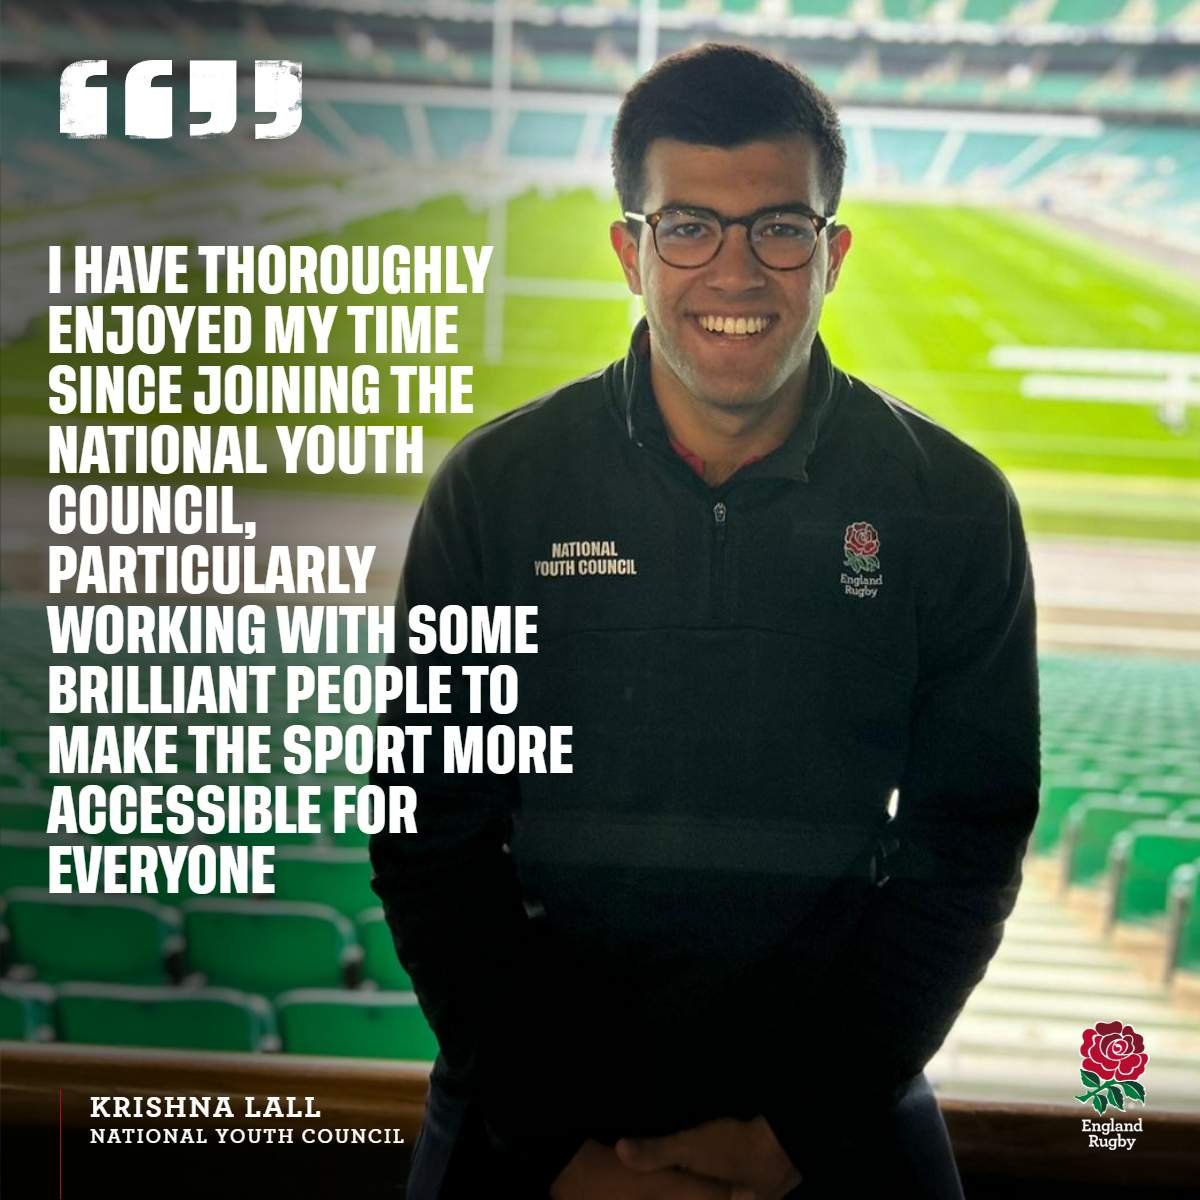 MAKE A DIFFERENCE BY JOINING THE RFU’S NATIONAL YOUTH COUNCIL The RFU’s National Youth Council are recruiting an additional five volunteers to join them for next season and make an impact across the game. Could you be a part of this? englandrugby.com/news/article/m…